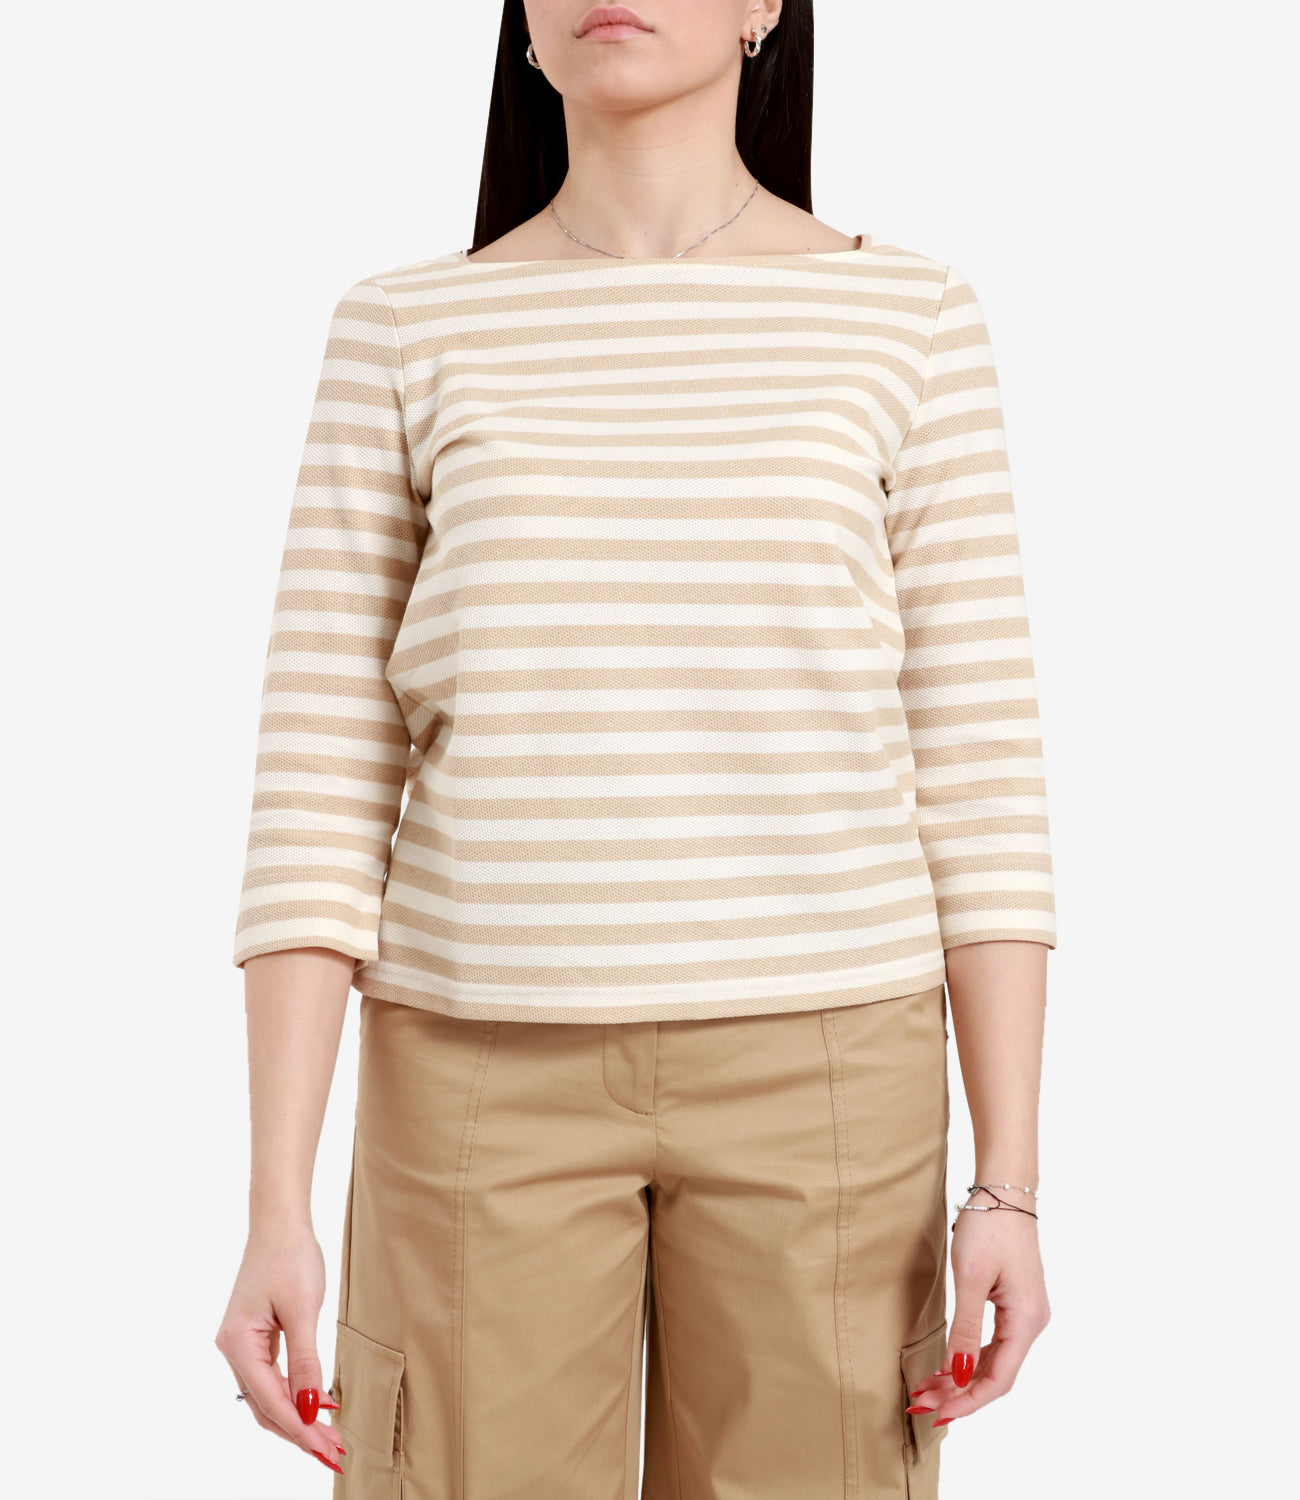 Pennyblack | Winter Sand and Ivory T-Shirt